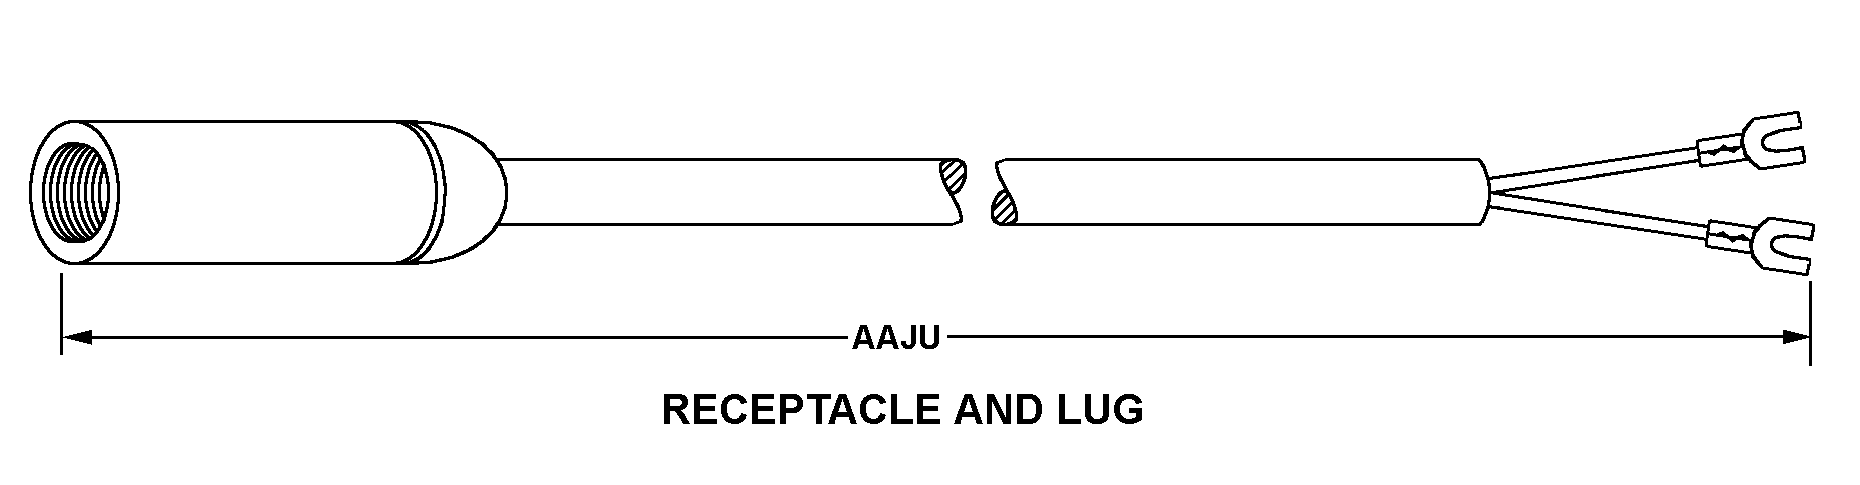 RECEPTACLE AND LUG style nsn 5995-01-057-9590